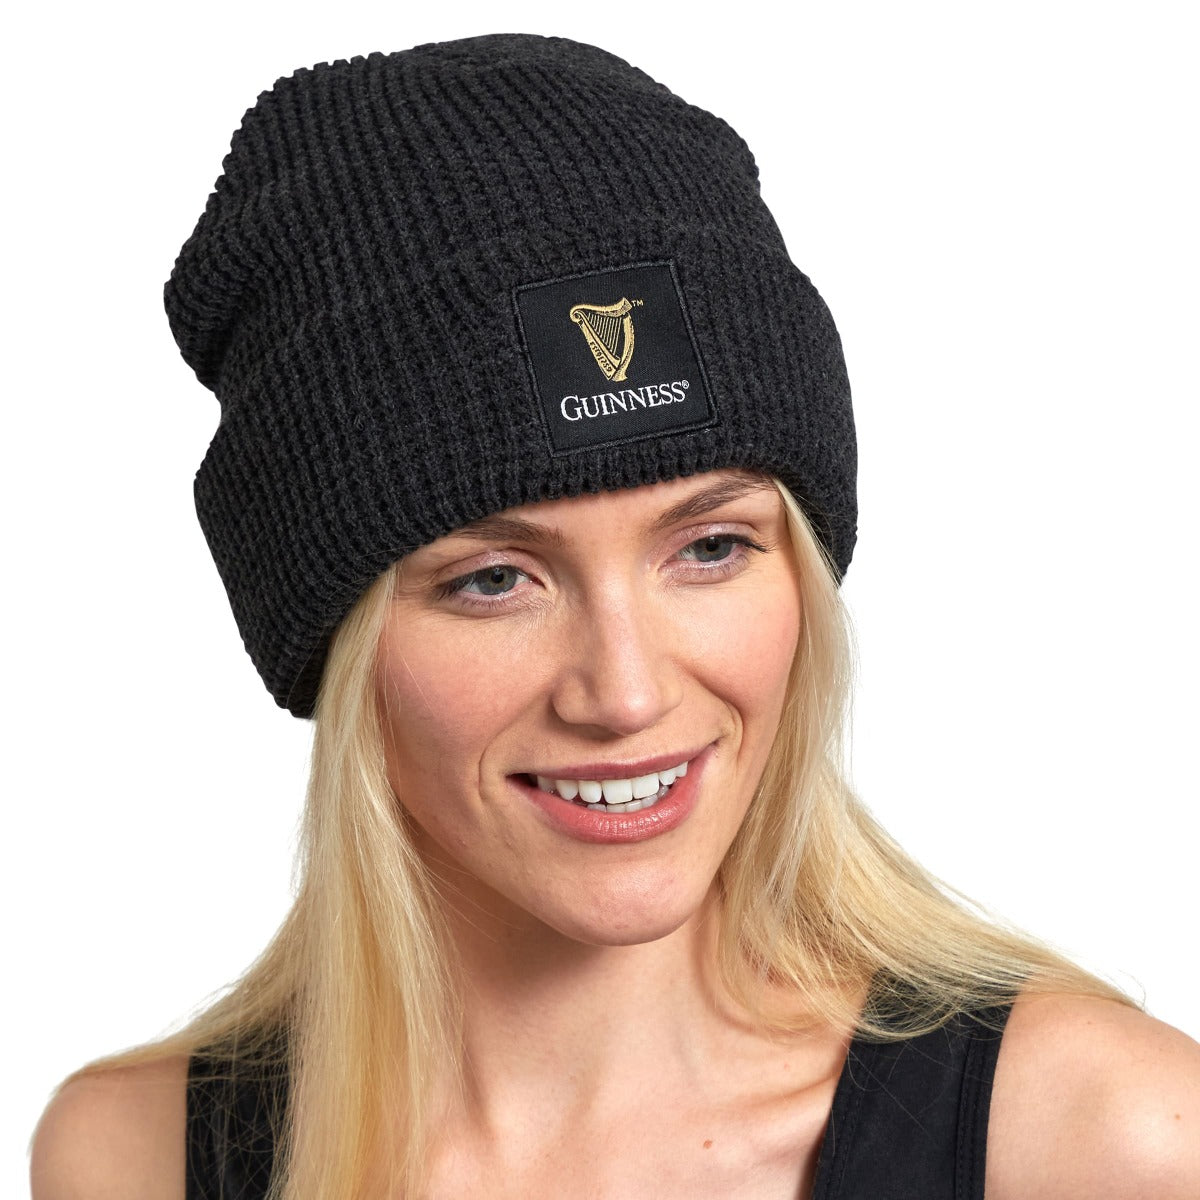 A woman wearing a Guinness Thinsulated beanie, with the Guinness logo showcased prominently on it.